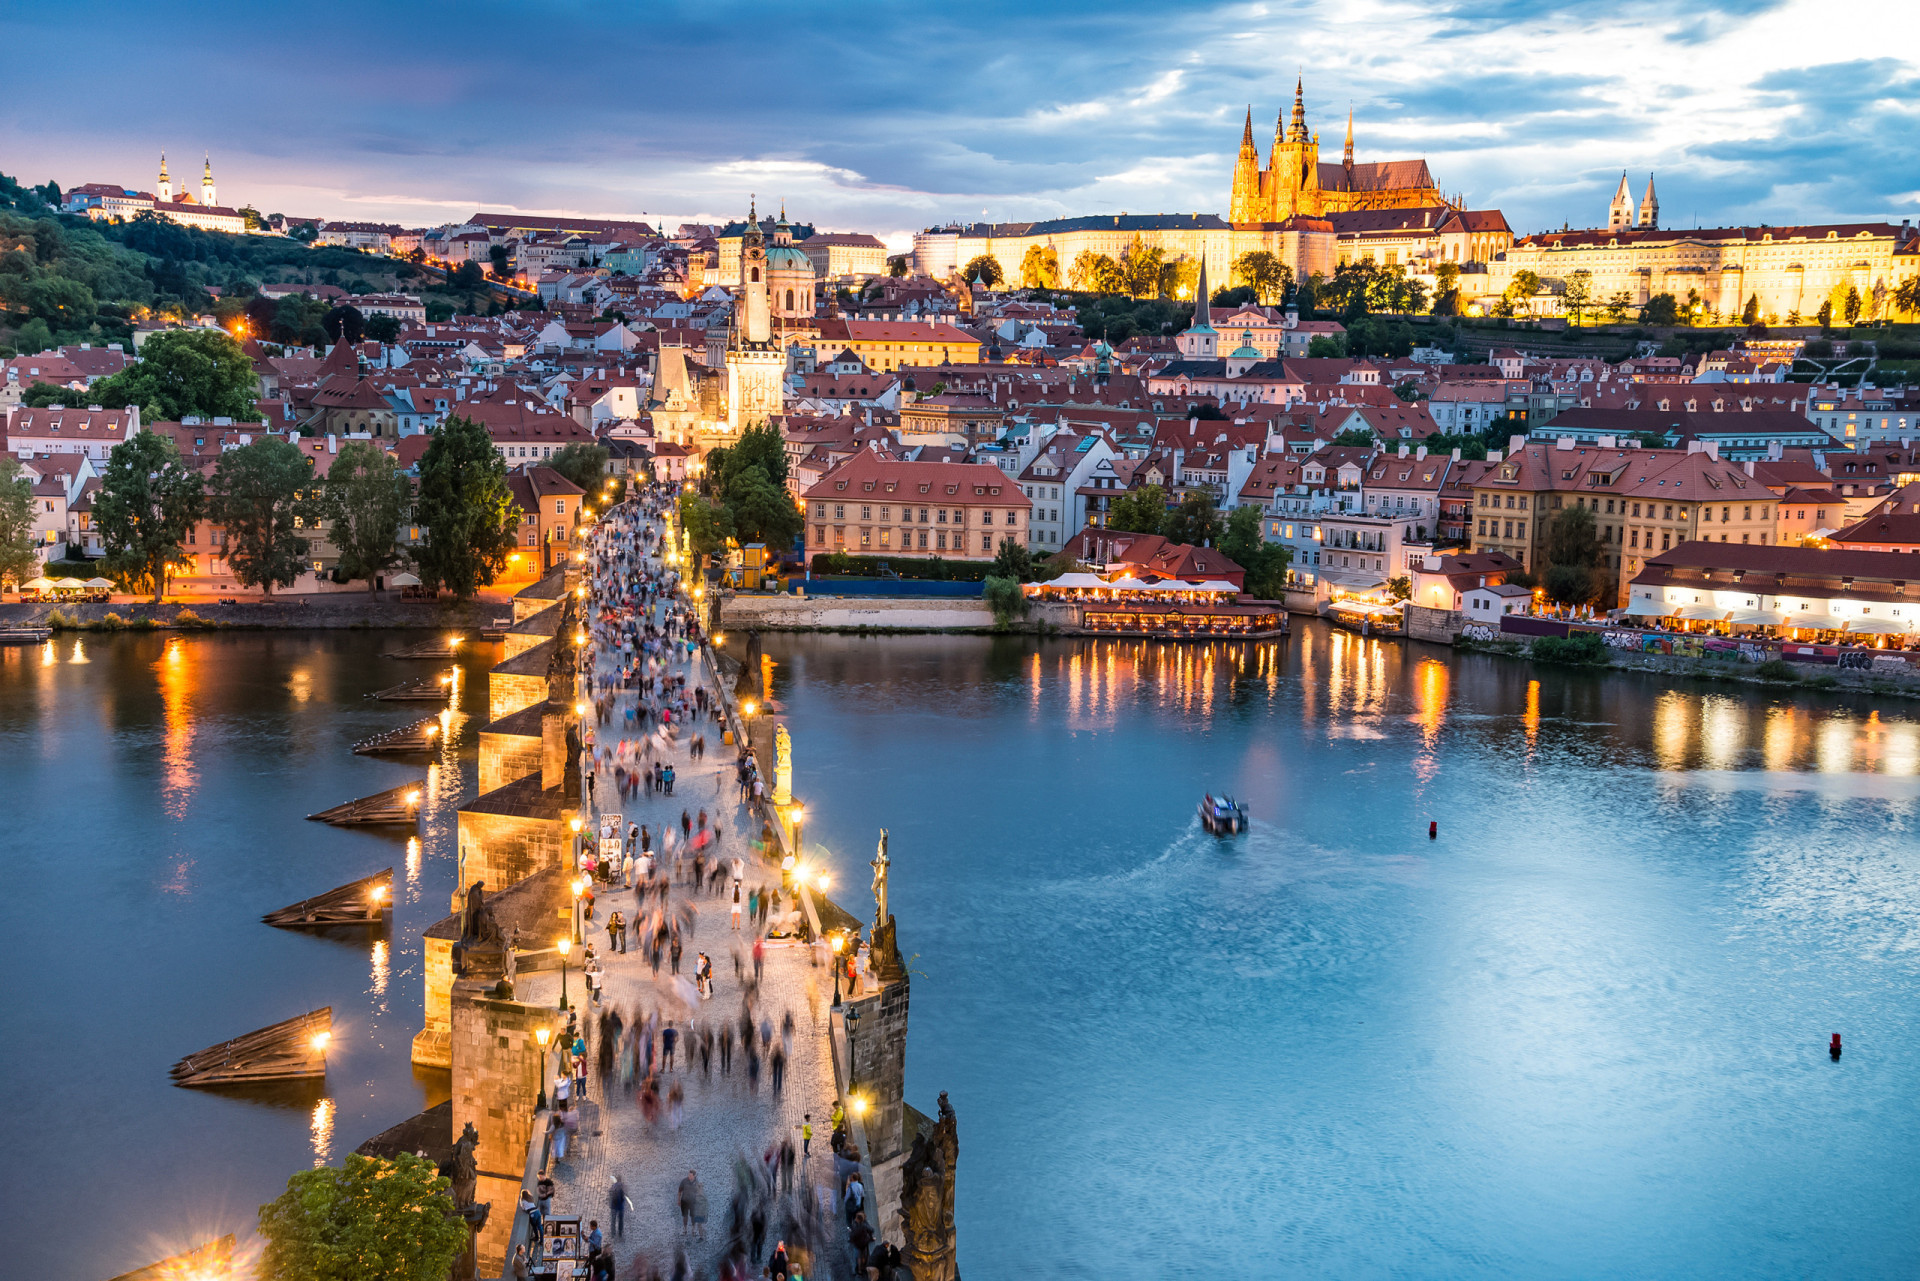 <p>In Prague, tourist tax typically costs around CZK50 (US$1.97) per night.</p><p>You may also like:<a href="https://www.starsinsider.com/n/223010?utm_source=msn.com&utm_medium=display&utm_campaign=referral_description&utm_content=683460en-ph"> Celebrities in the same outfits: Who wore it better? </a></p>